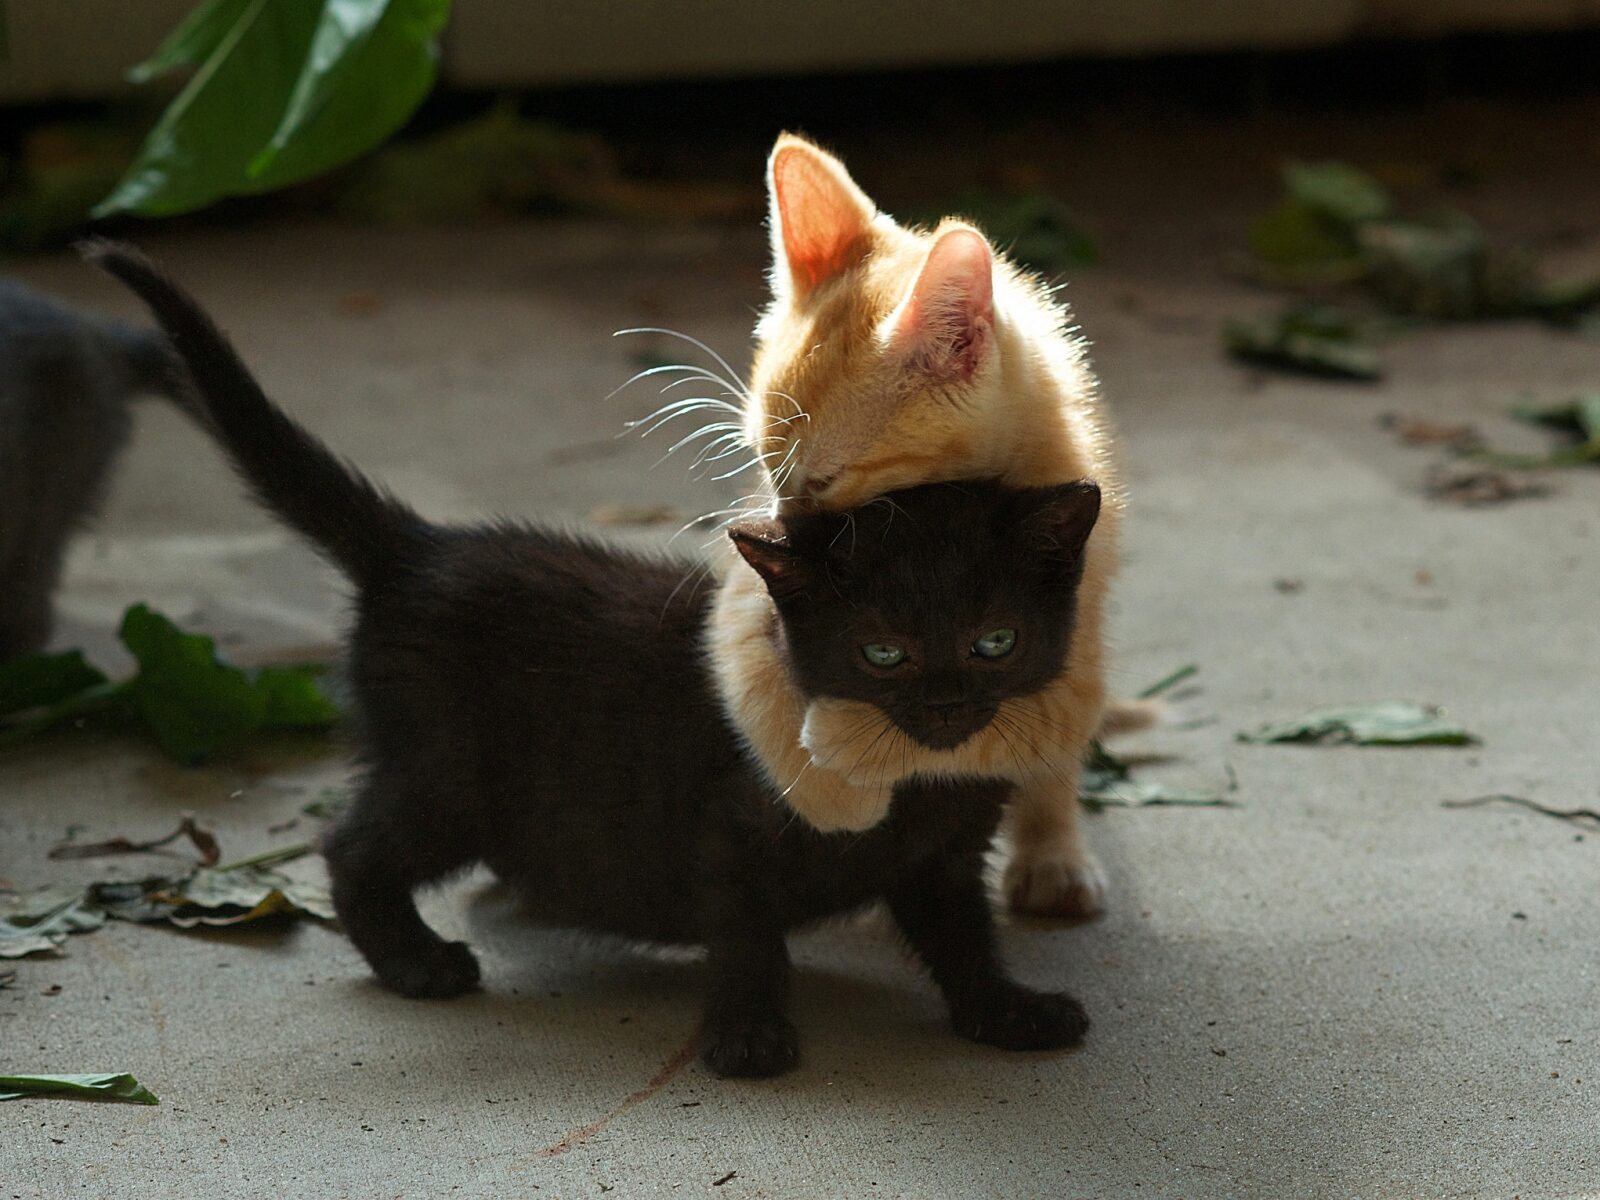 Orange colored kitten grabs the neck of a black kitten with both hands